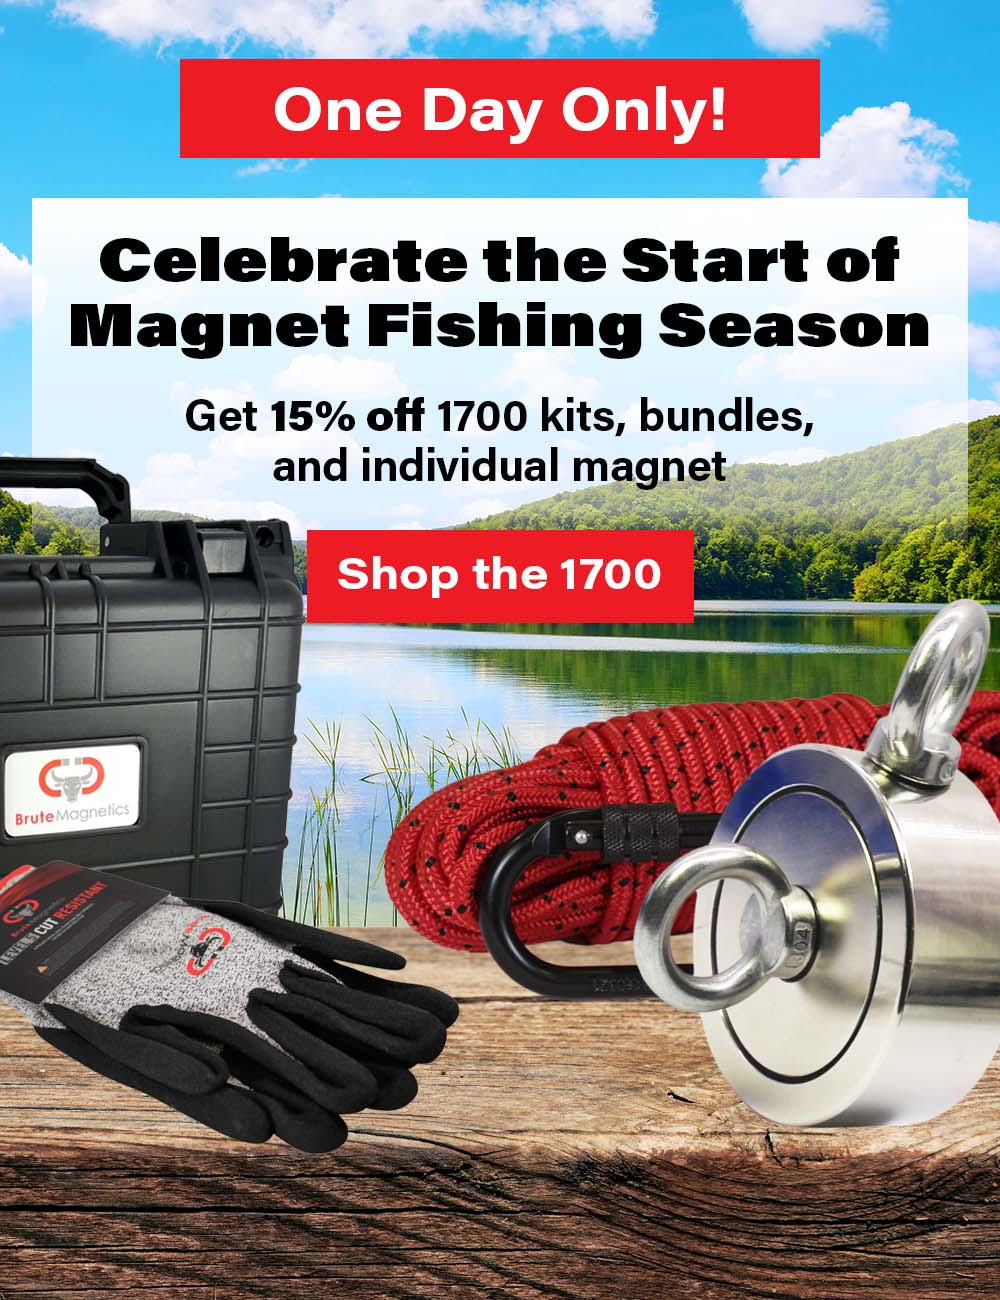 One Day Only! Celebrate the Start of Magnet Fishing Season Get 15% off 1700 kits, bundles, and individual magne 